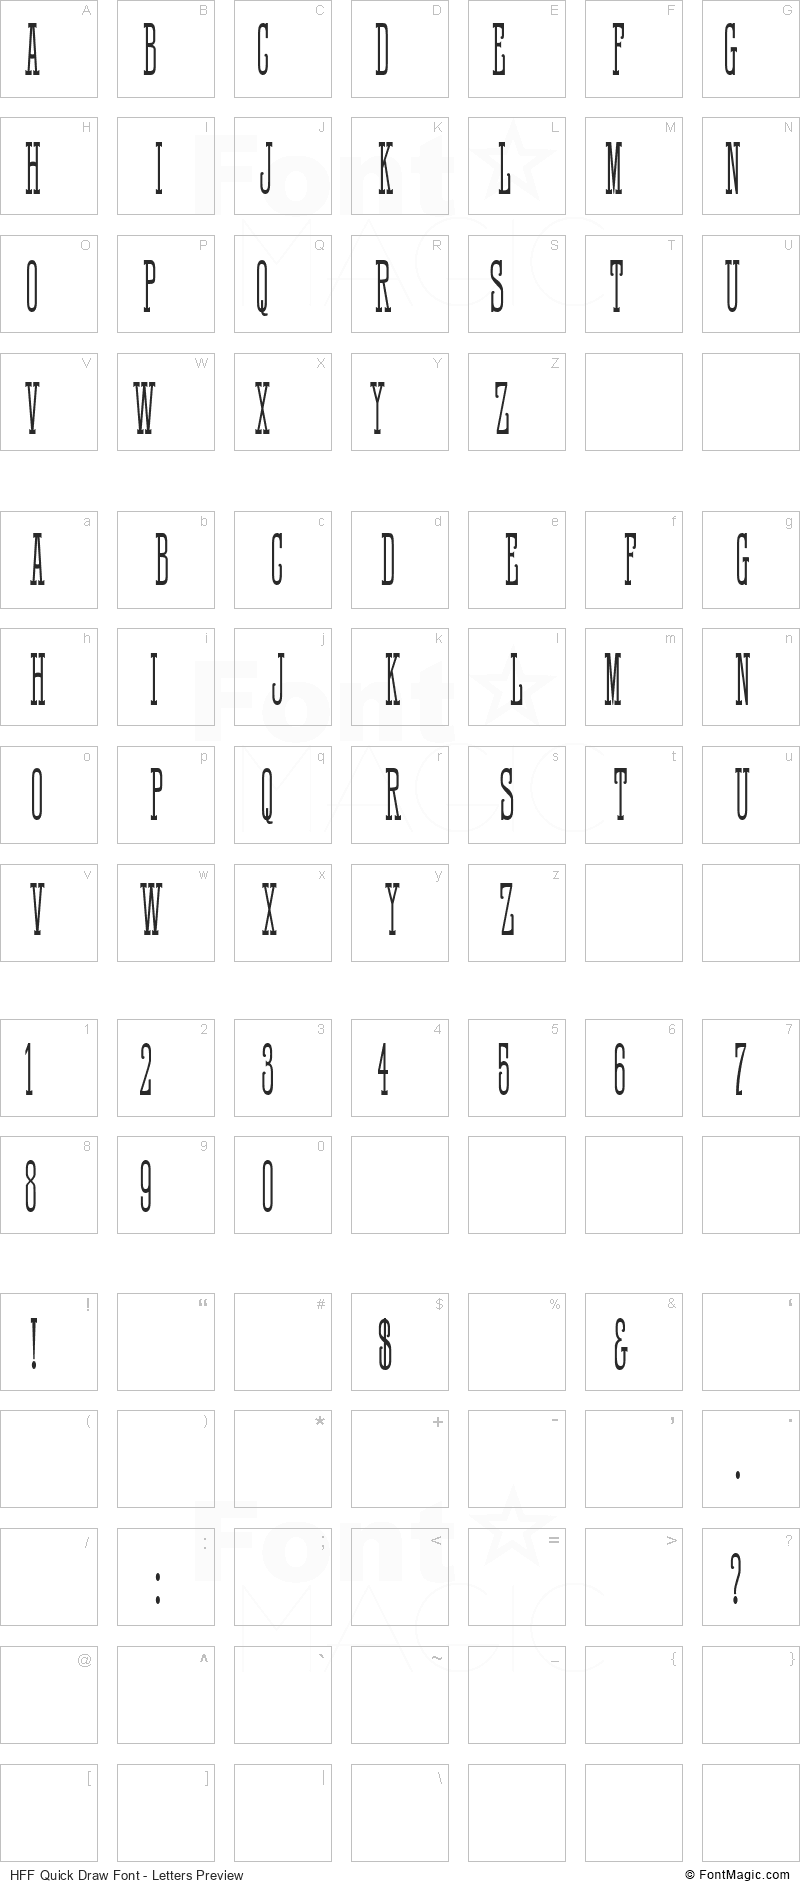 HFF Quick Draw Font - All Latters Preview Chart